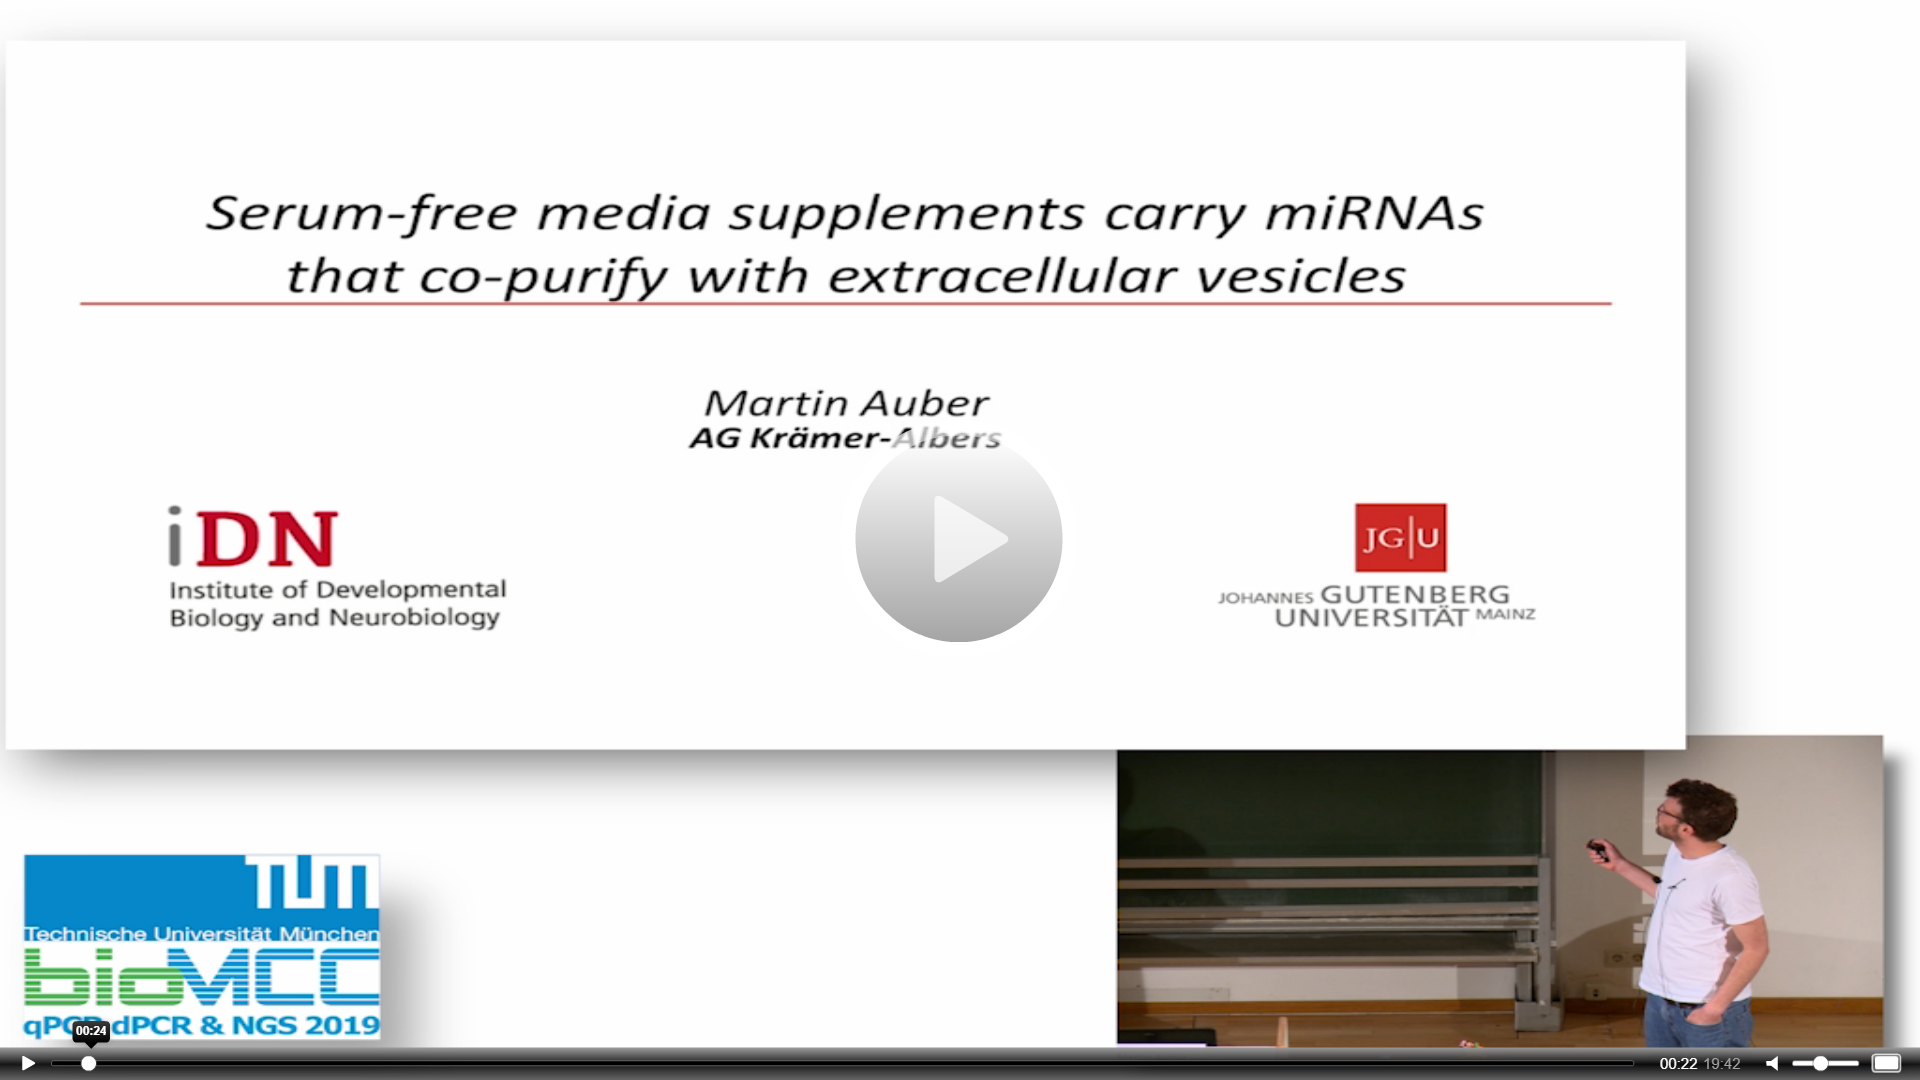 Serum-Free Media Supplements Carry miRNAs That Co-Purify With Extracellular Vesicles